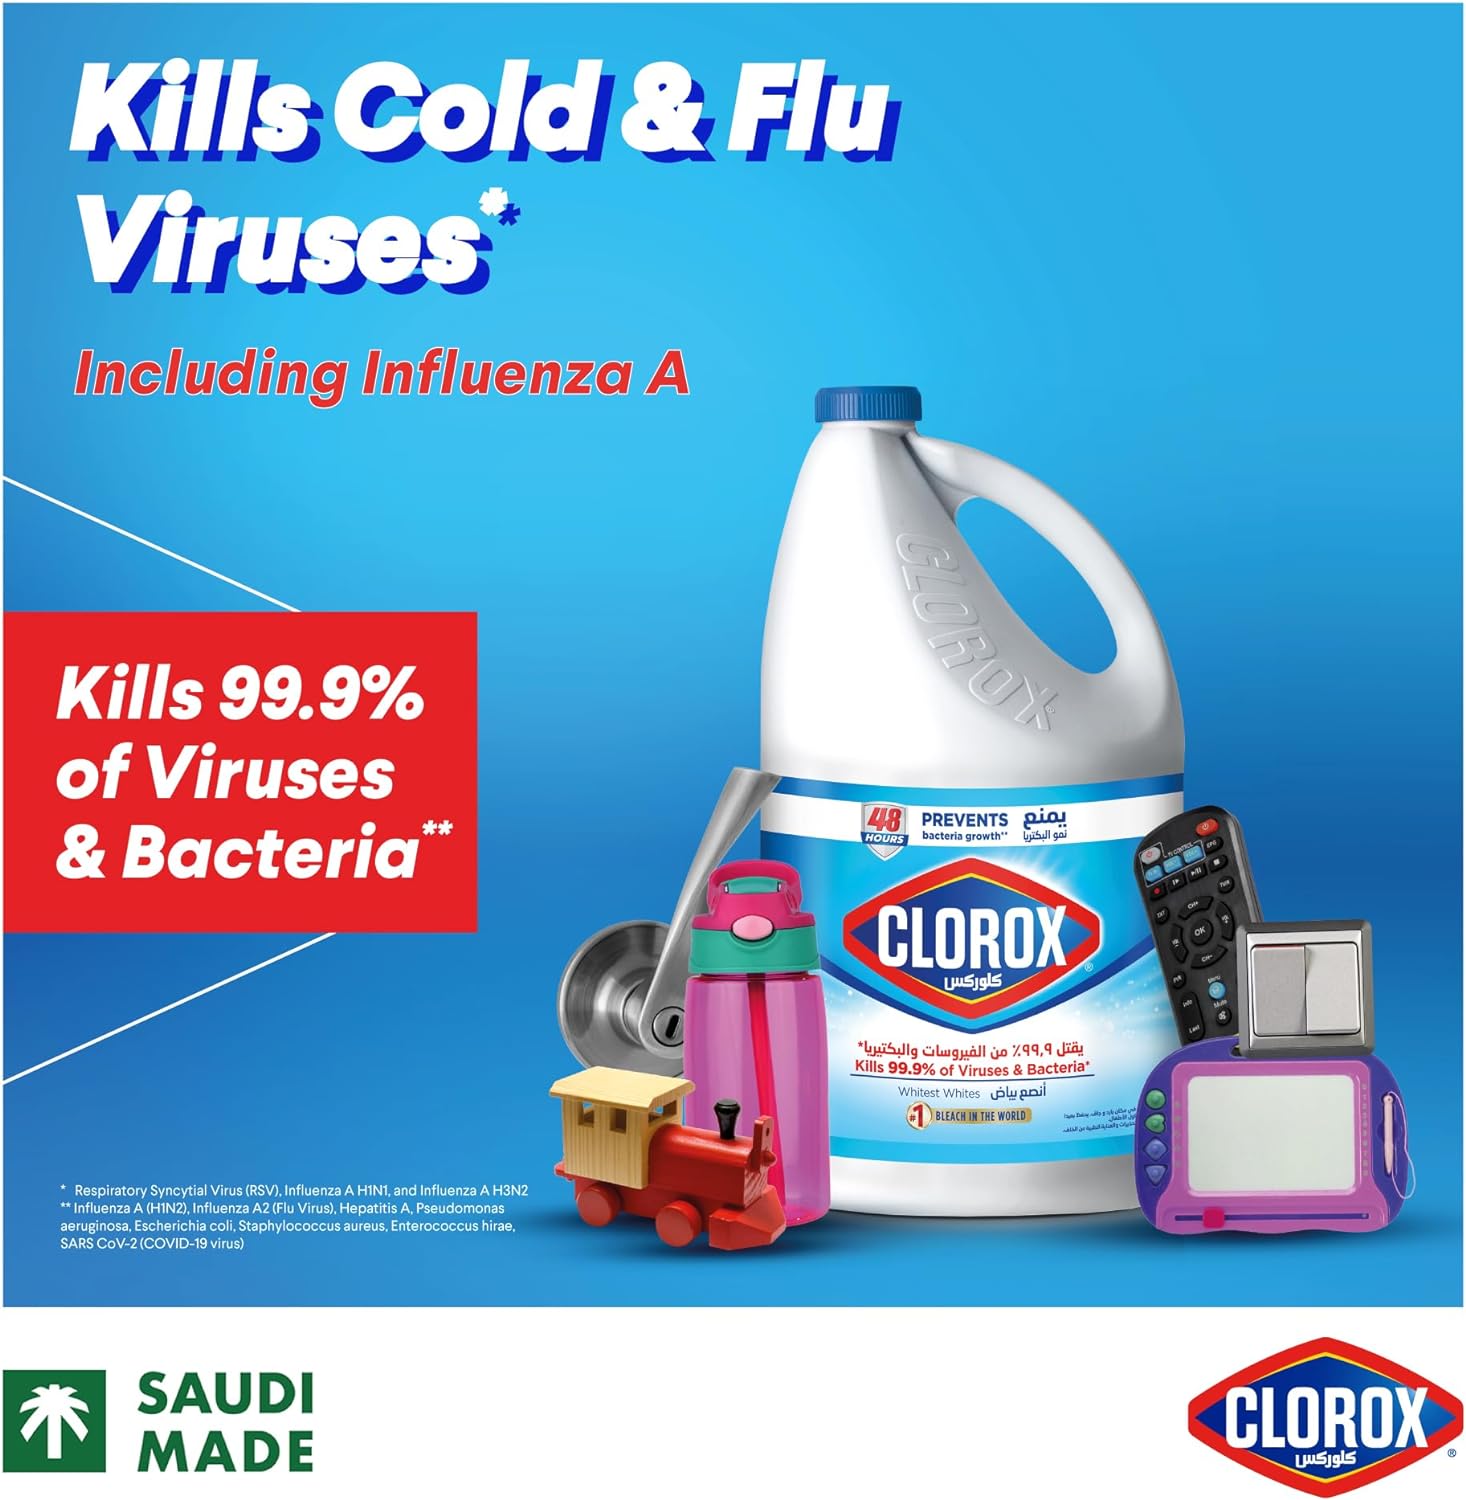 Clorox Liquid Bleach 3.78 Litres for Home & Office, Kills 99.9% Viruses & Bacteria, Removes Stains - Alcohol Free, Original Scent